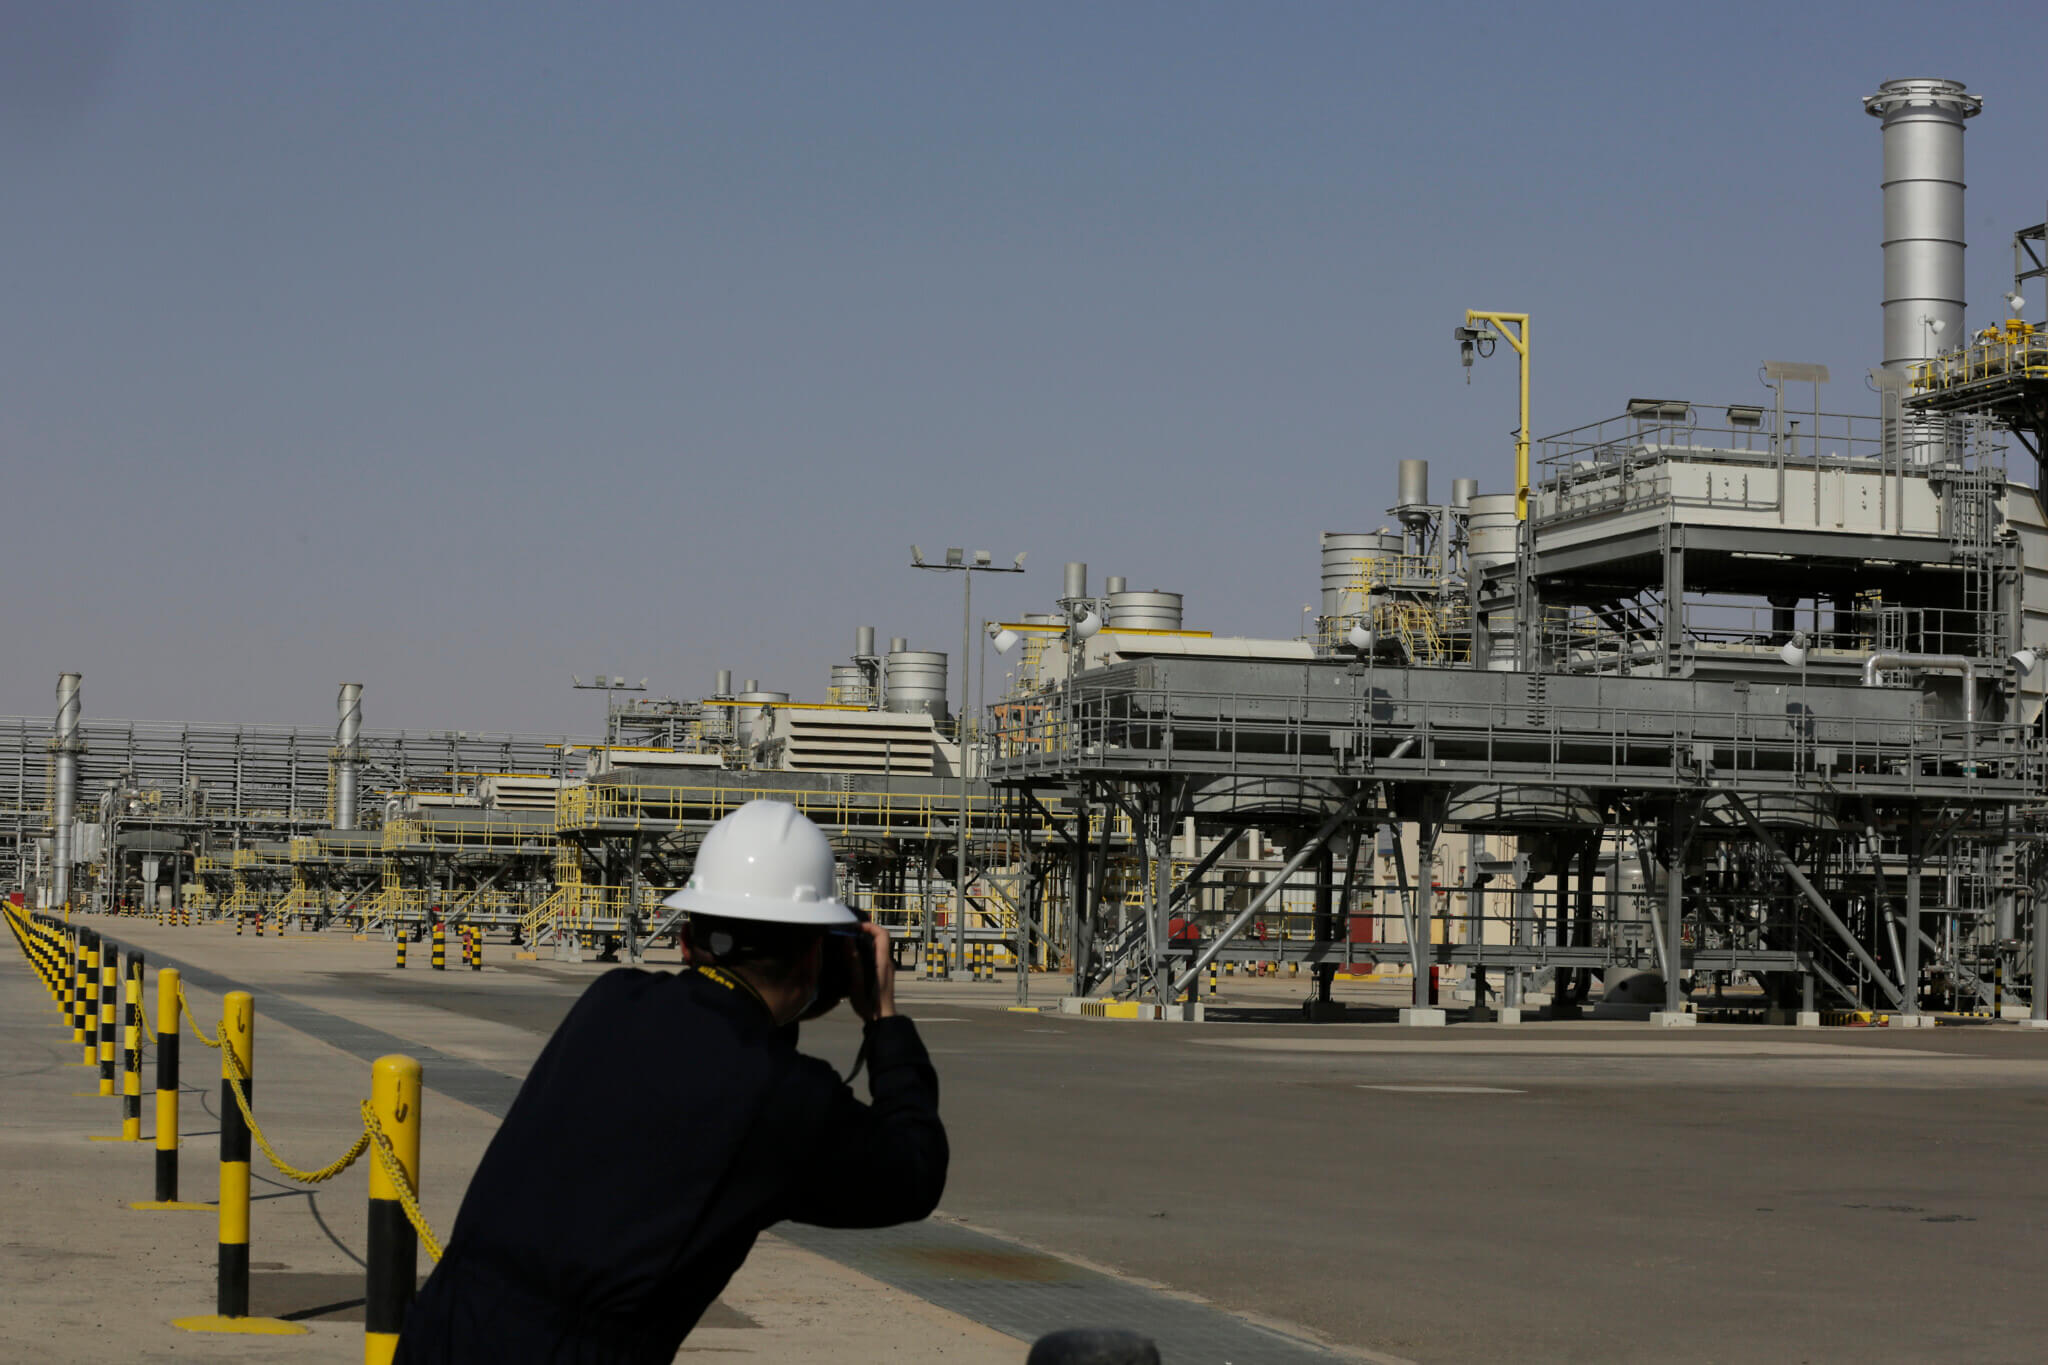 Saudi Arabia Oil Supply Slashes, Potentially Raising Gas Prices for US Drivers